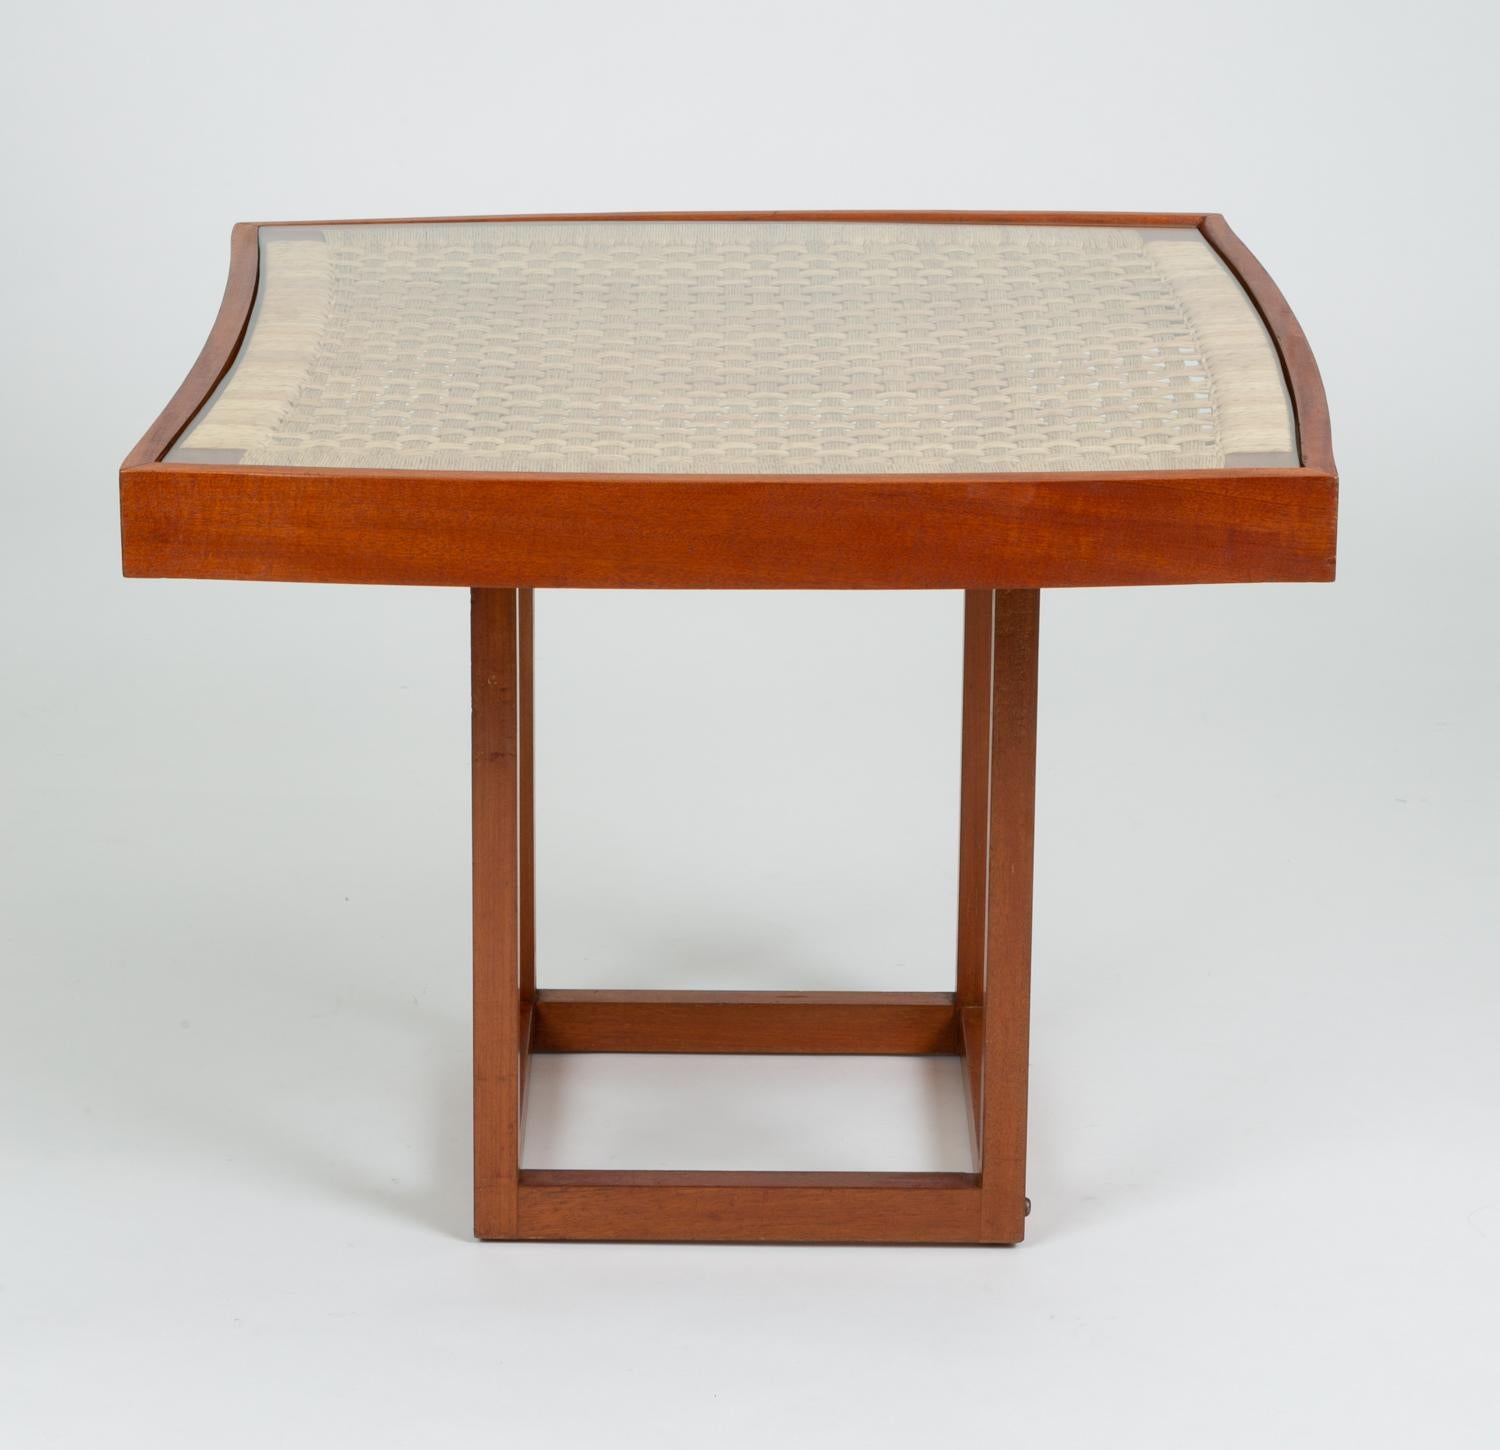 Teak Convertible Coffee or Dining Table by Michael van Beuren for Domus Mexico